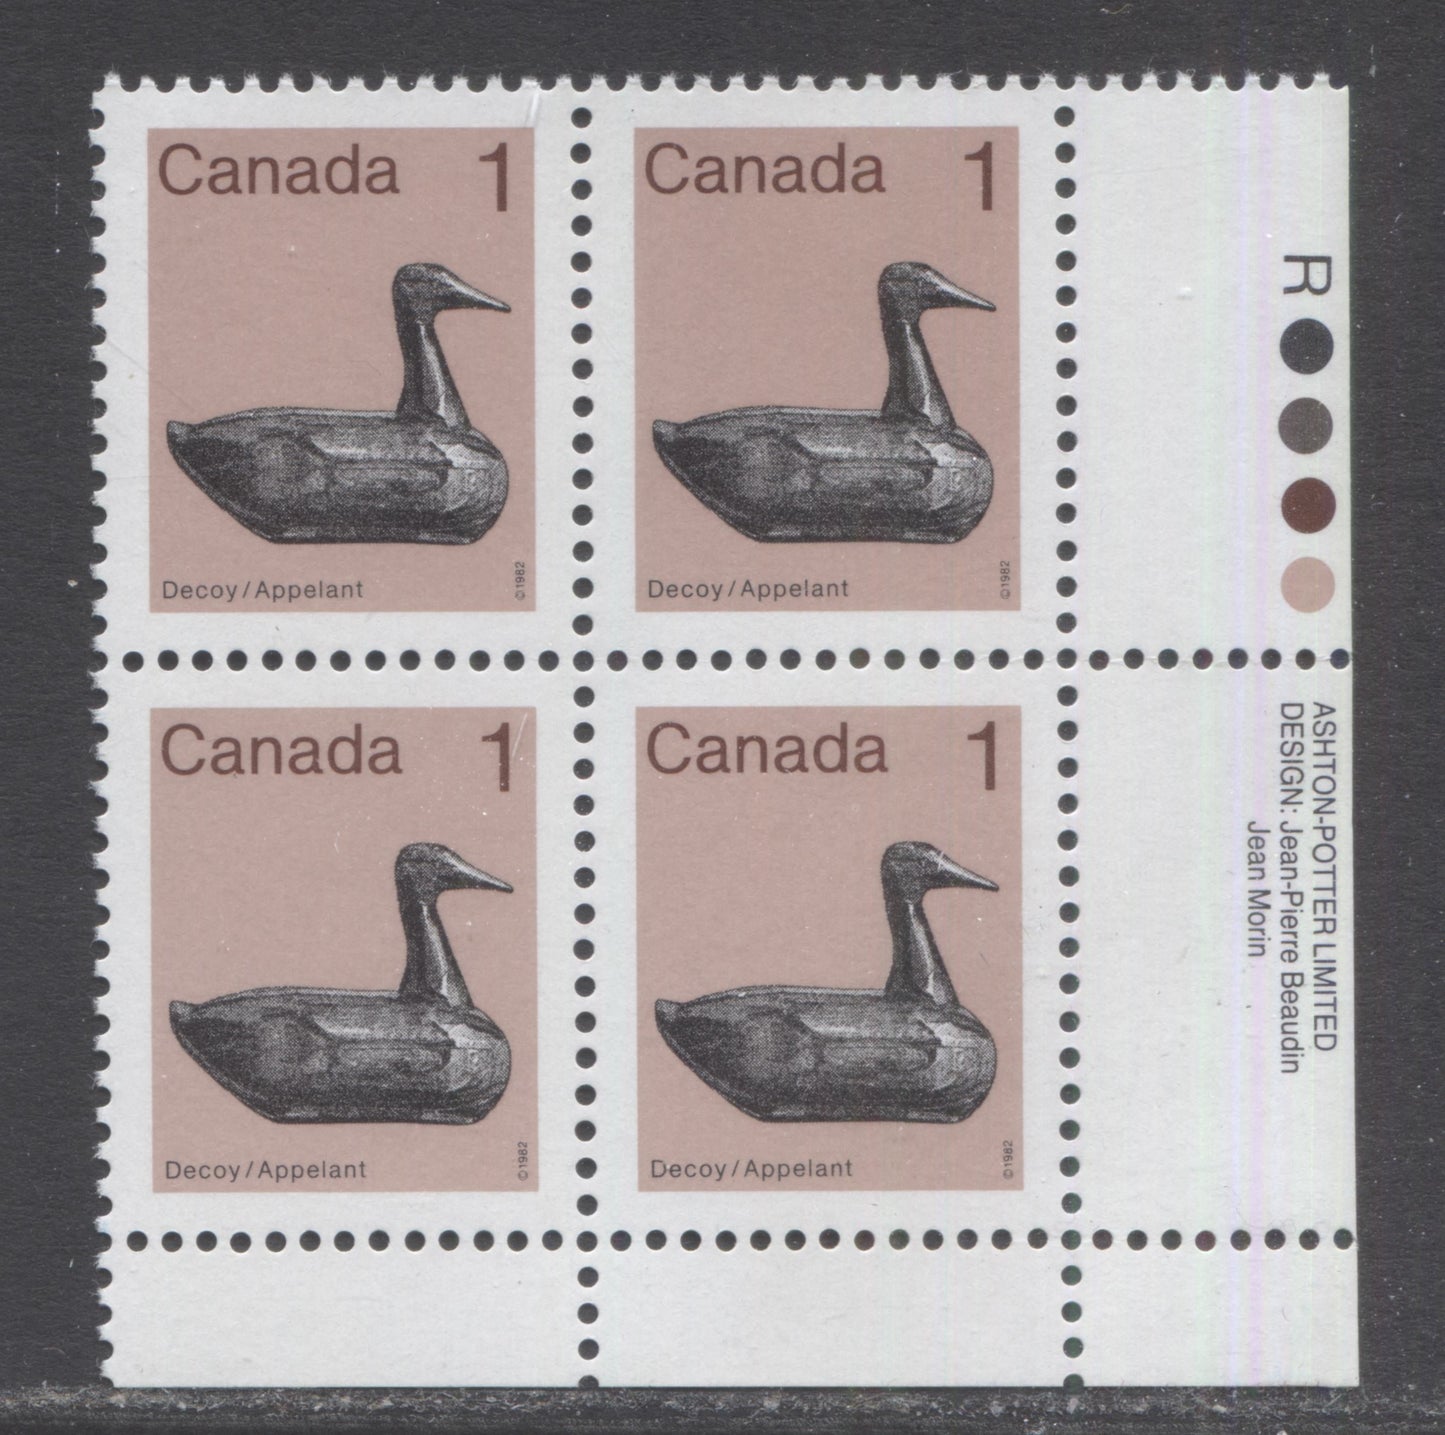 Lot 290 Canada #917vvar 1c Light Brown & Multicolored Decoy, 1982-1897 Low-Value Artifact Definitives, A VFNH LR Inscription Block Of 4 With Hair On Duck's Head On LF/F-fl Rolland Paper